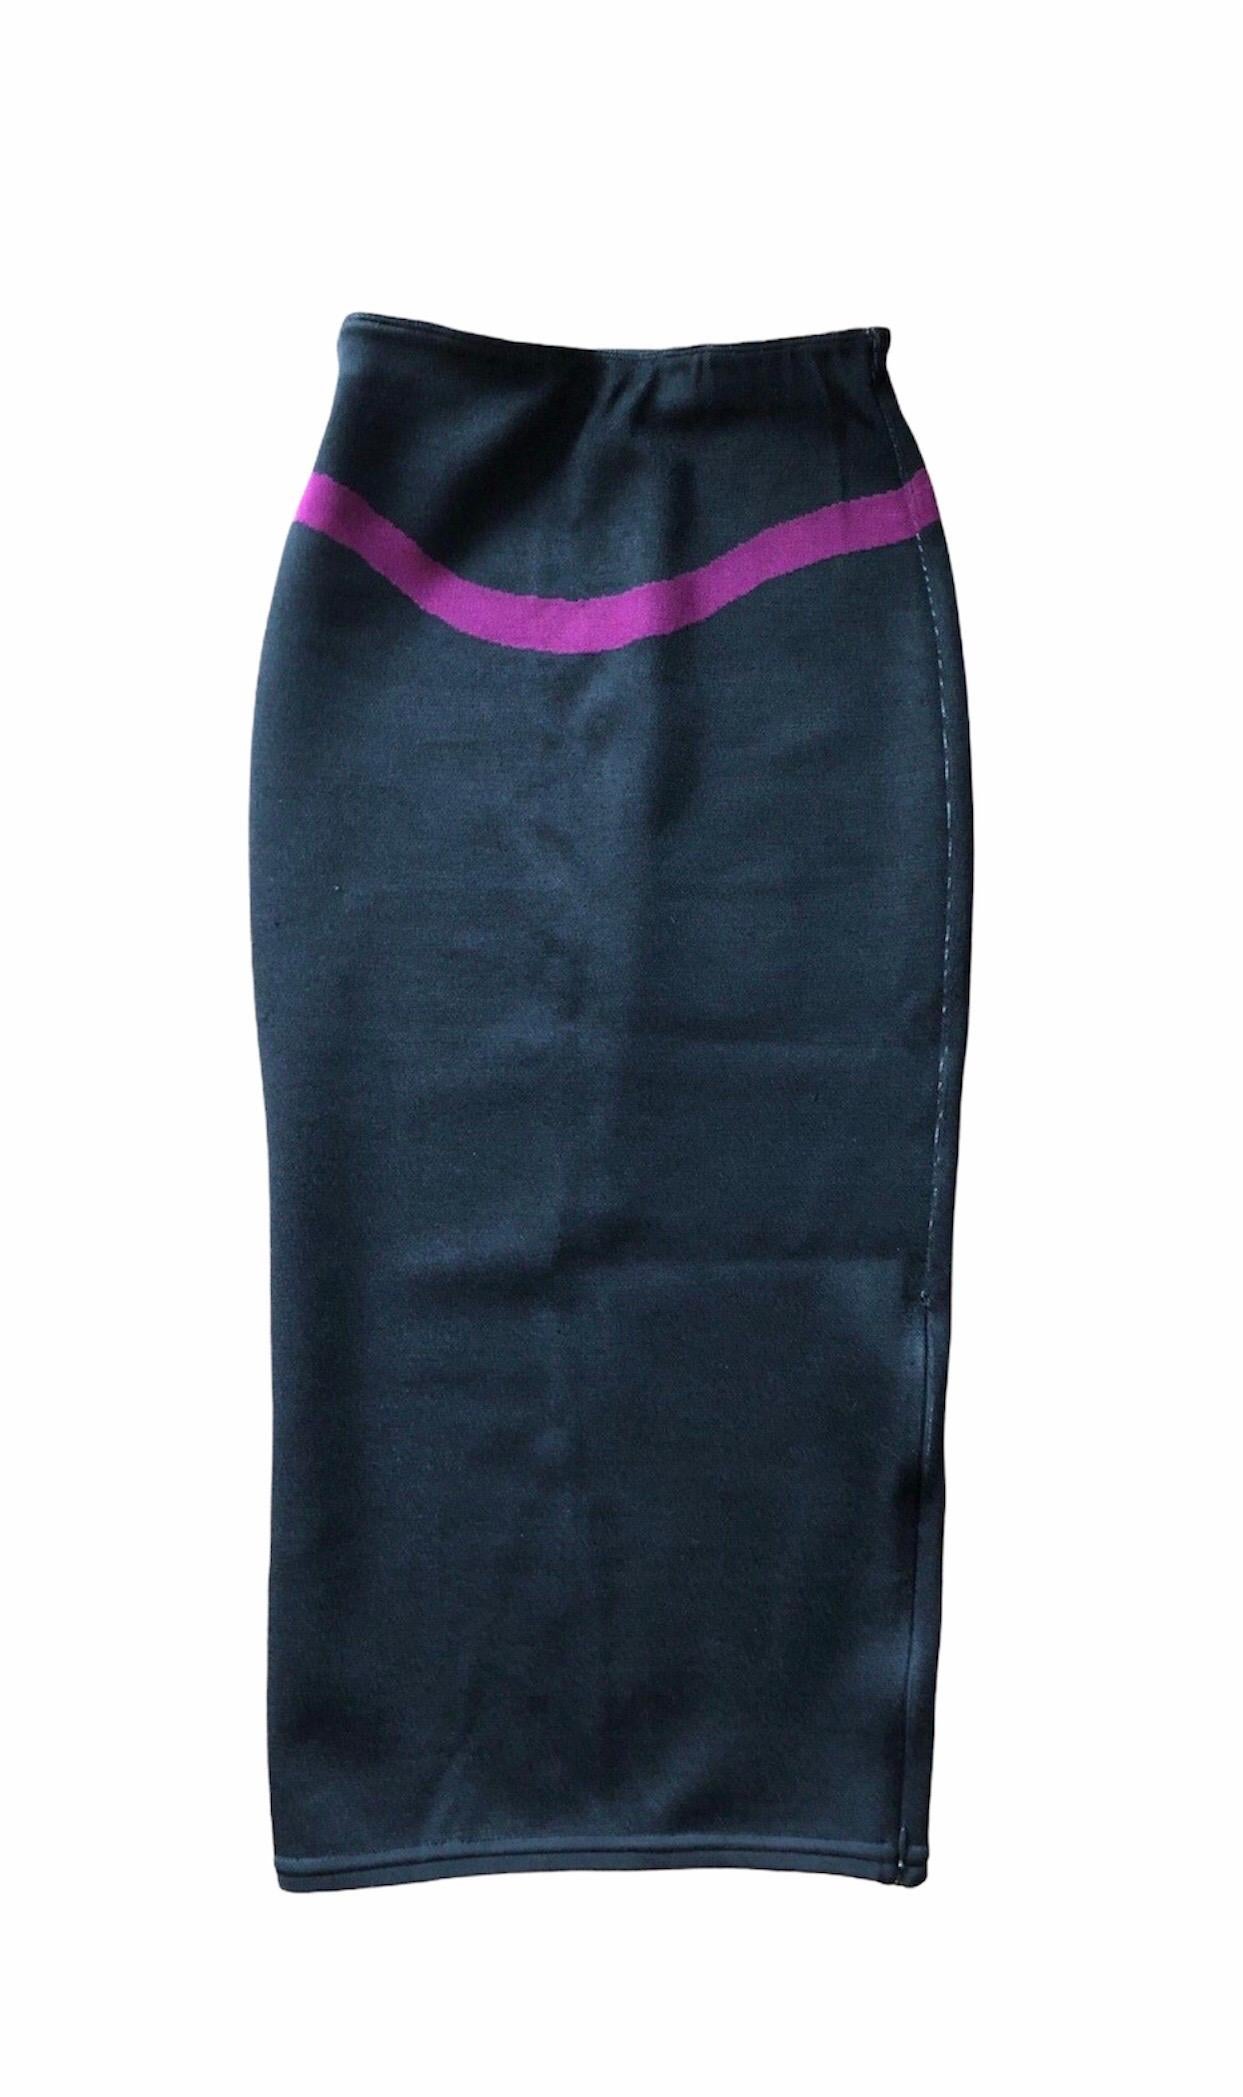 Azzedine Alaia F/W 1992 Runway Vintage Bow Wrapped Fitted Skirt Iconic Piece!!!

Alaïa midi skirt with bow pattern at back, tonal stitching throughout and elasticized waistband.

All Eyes on Alaïa

For the last half-century, the world’s most